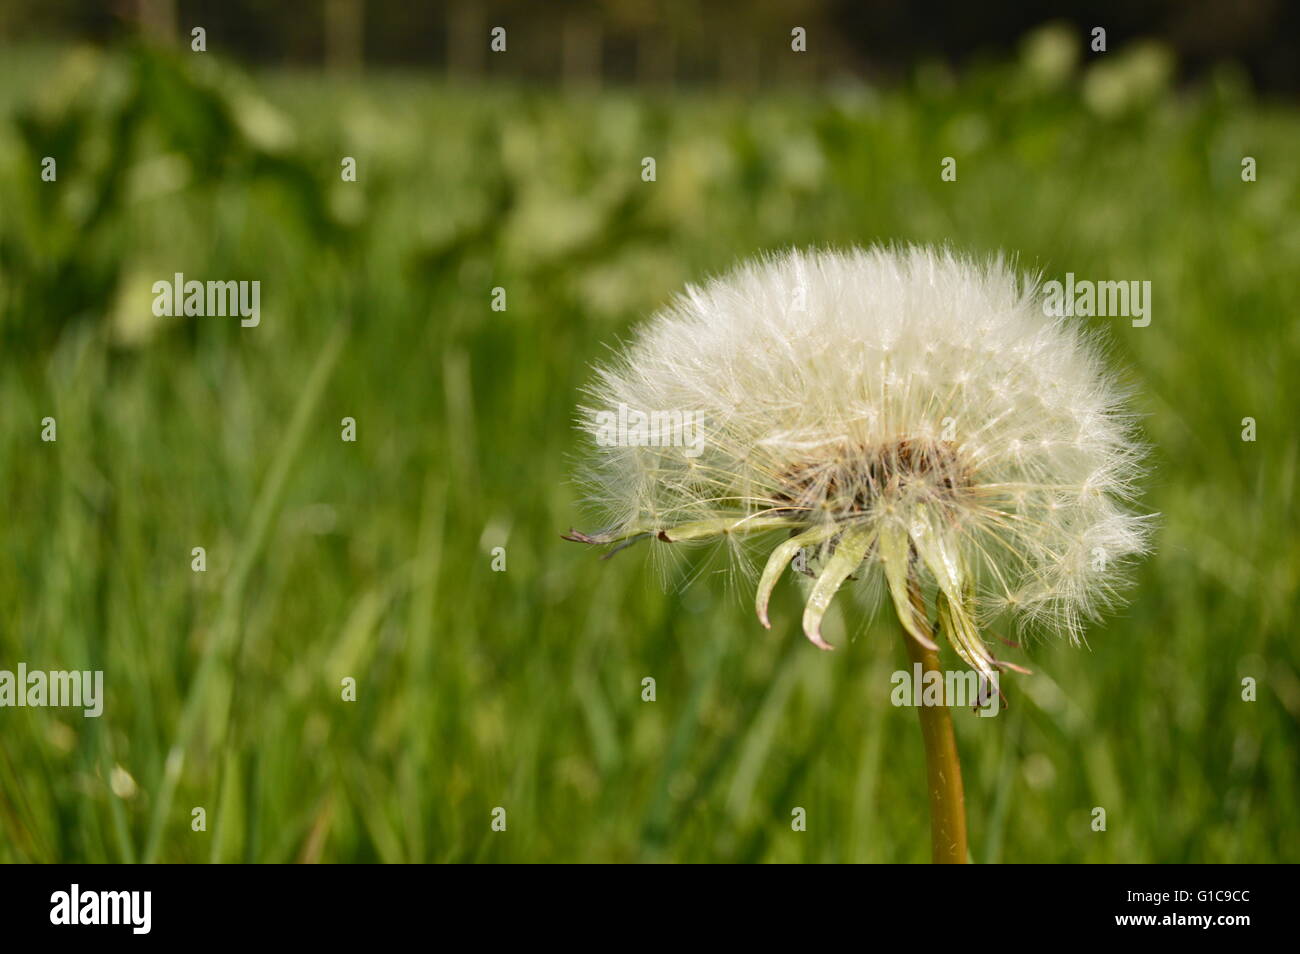 Dandelion - A dandelion is a flower. Its scientific name is Taraxacum, a large genus of flowering plants in the family Asteraceae. Stock Photo